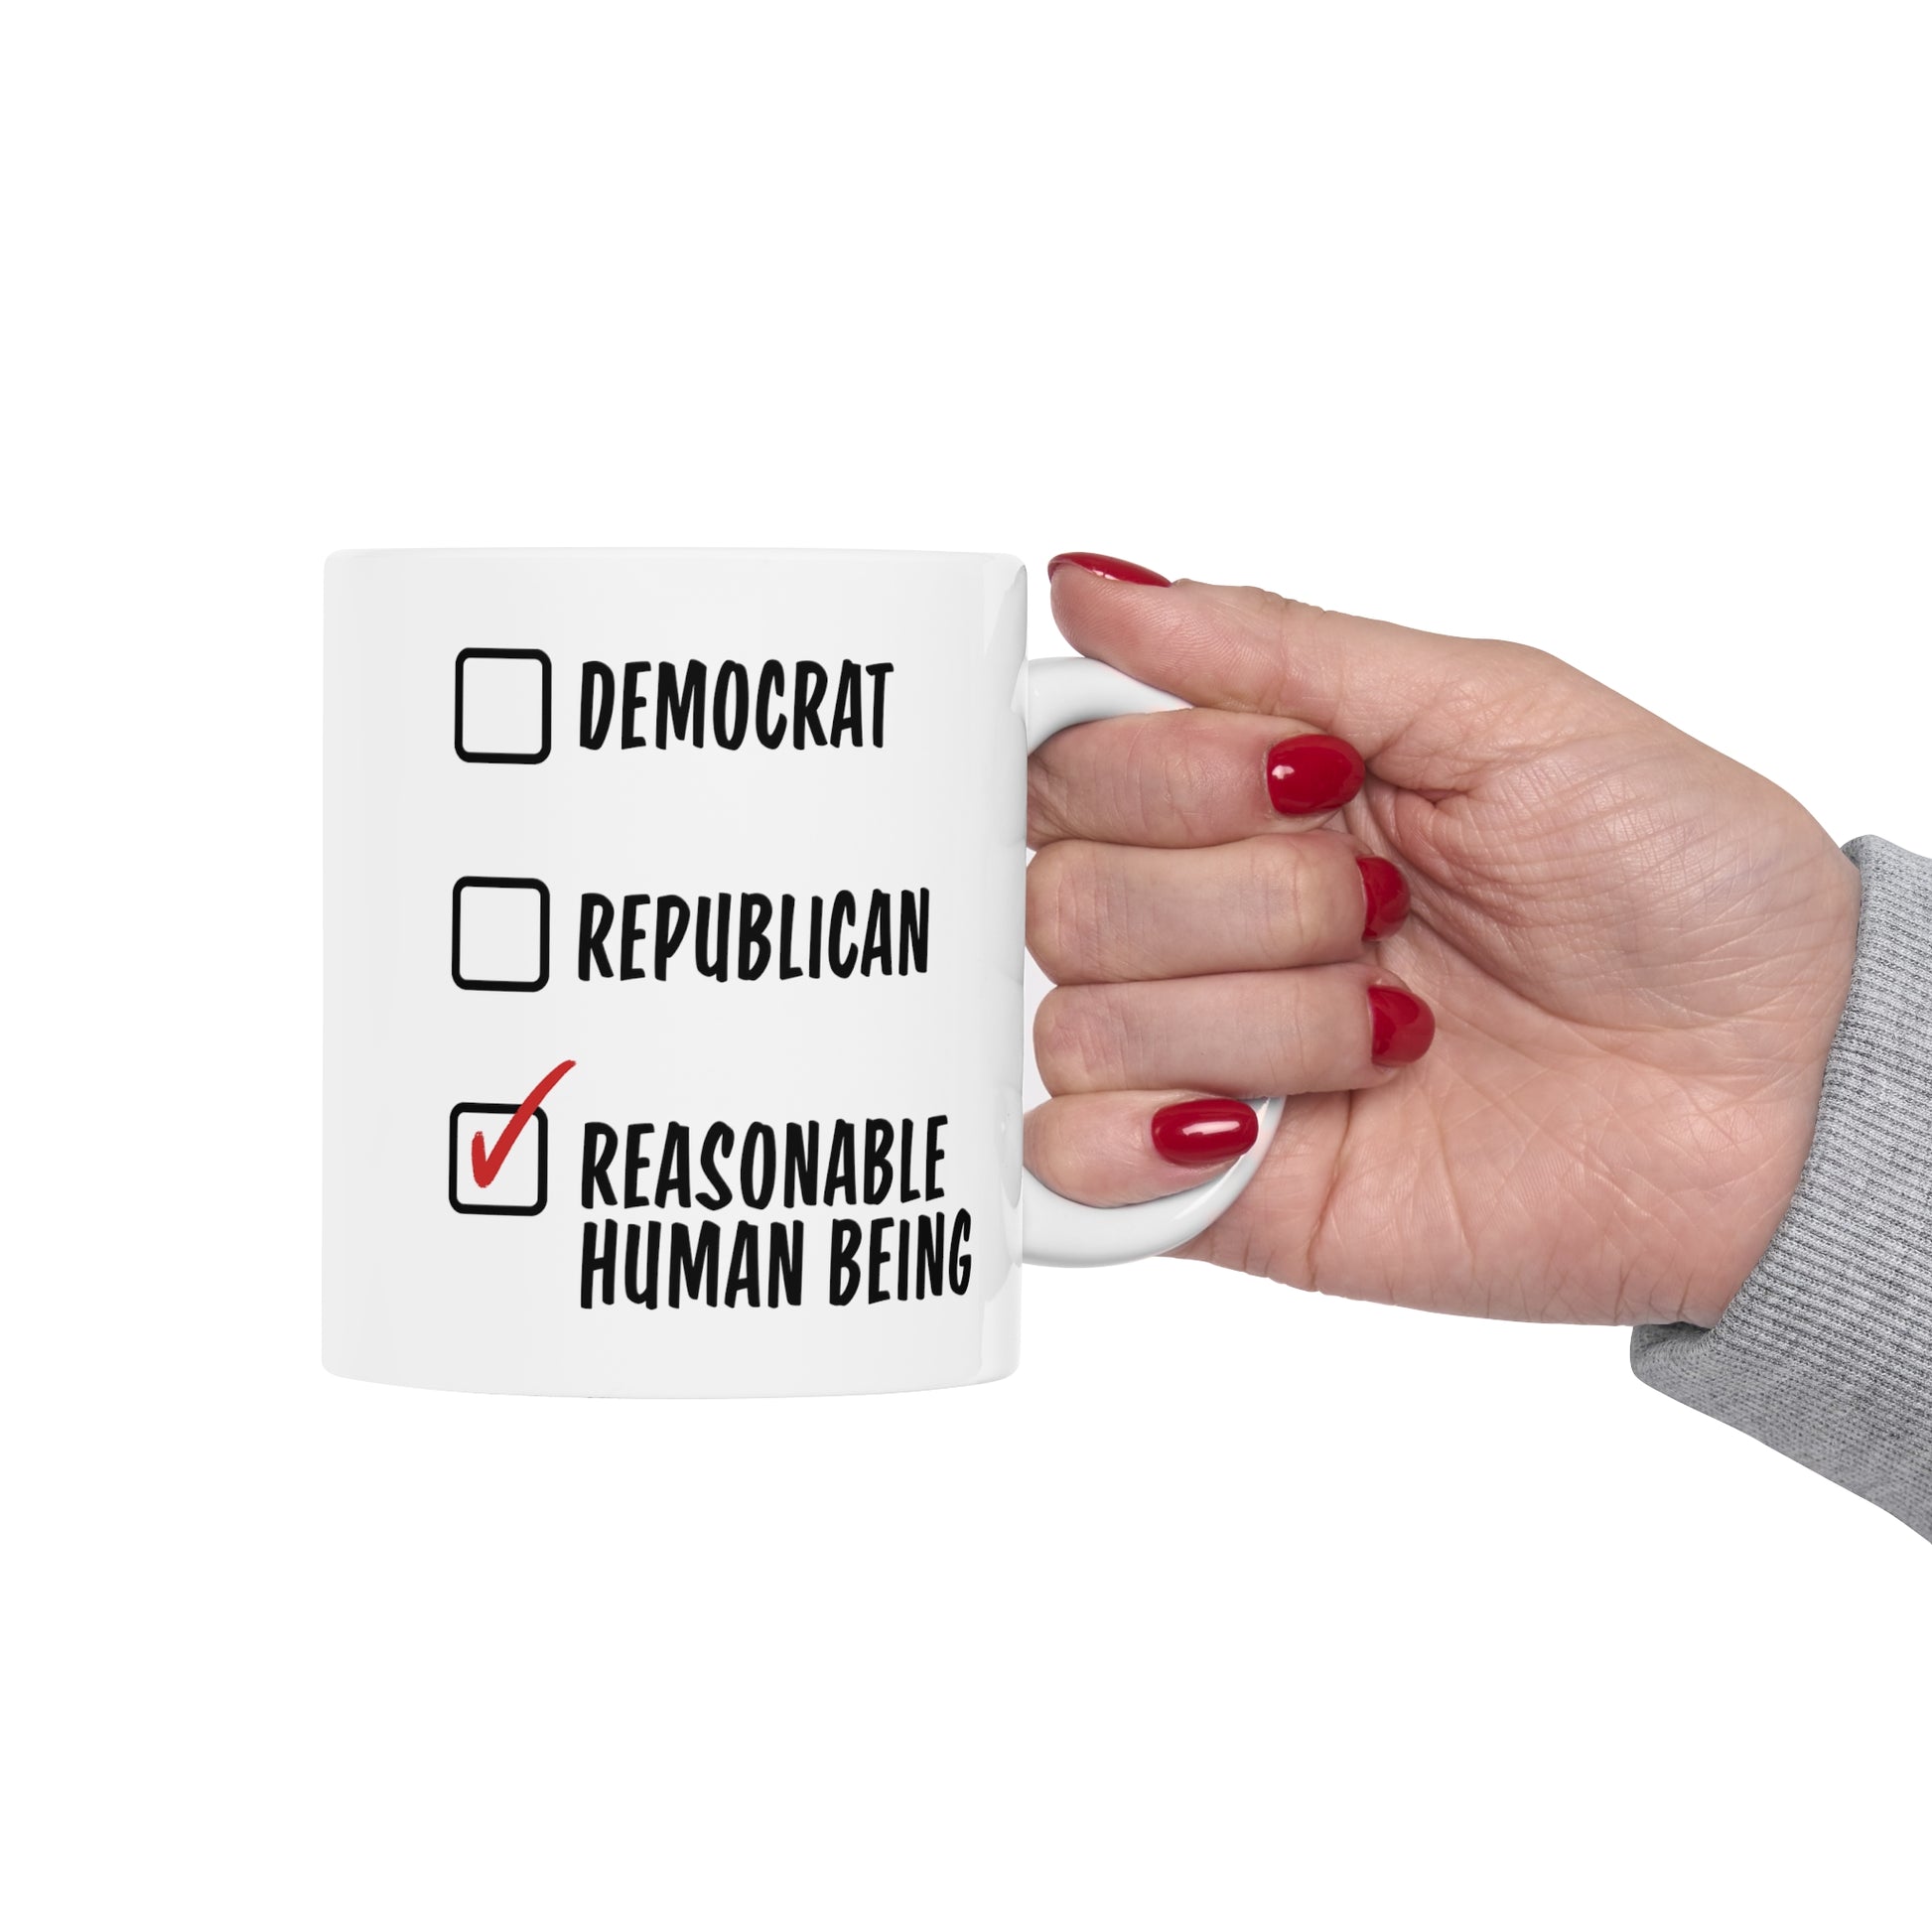 Funny Political Mug, Reasonable Human Being, Democrat Republican Checklist, Coffee Cup Humor, Gift for Friends, Bipartisan Laugh, Novelty - News For Reasonable People